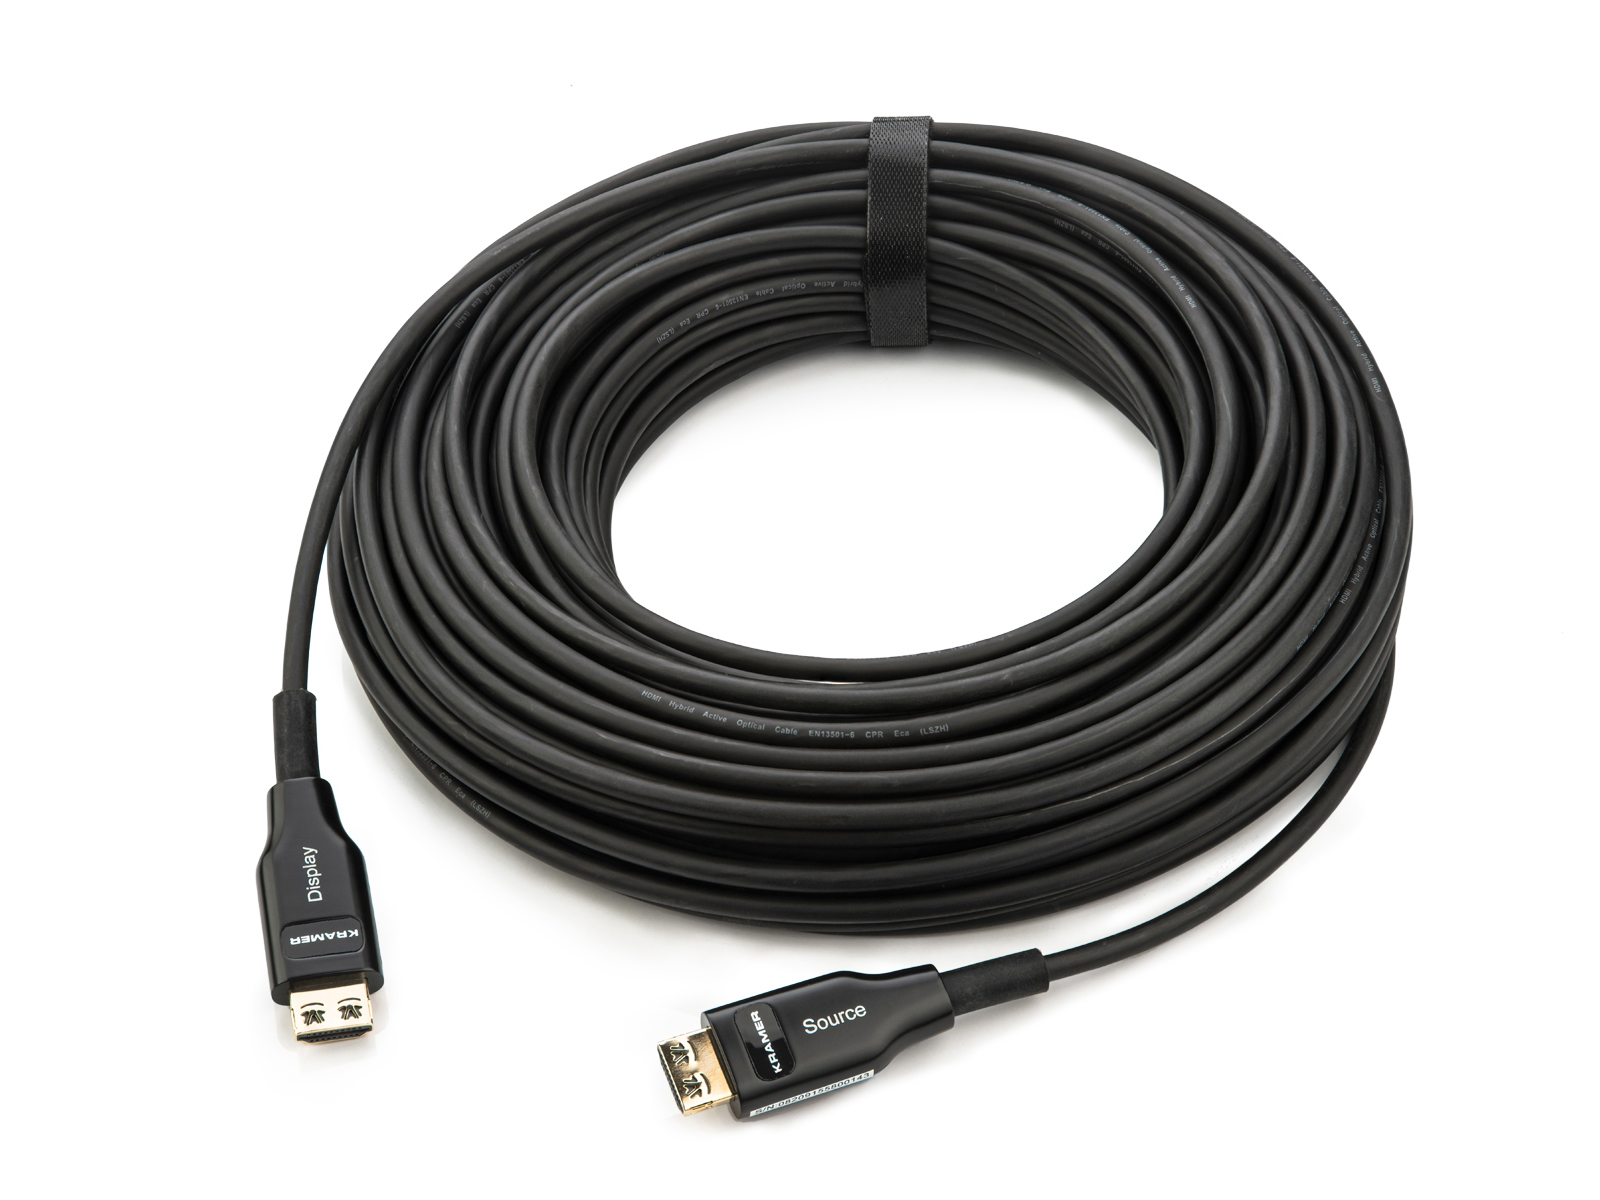 CP-AOCH/60F-98 30m/98ft High-Speed HDMI Optic Hybrid Cable - Plenum Rated by Kramer